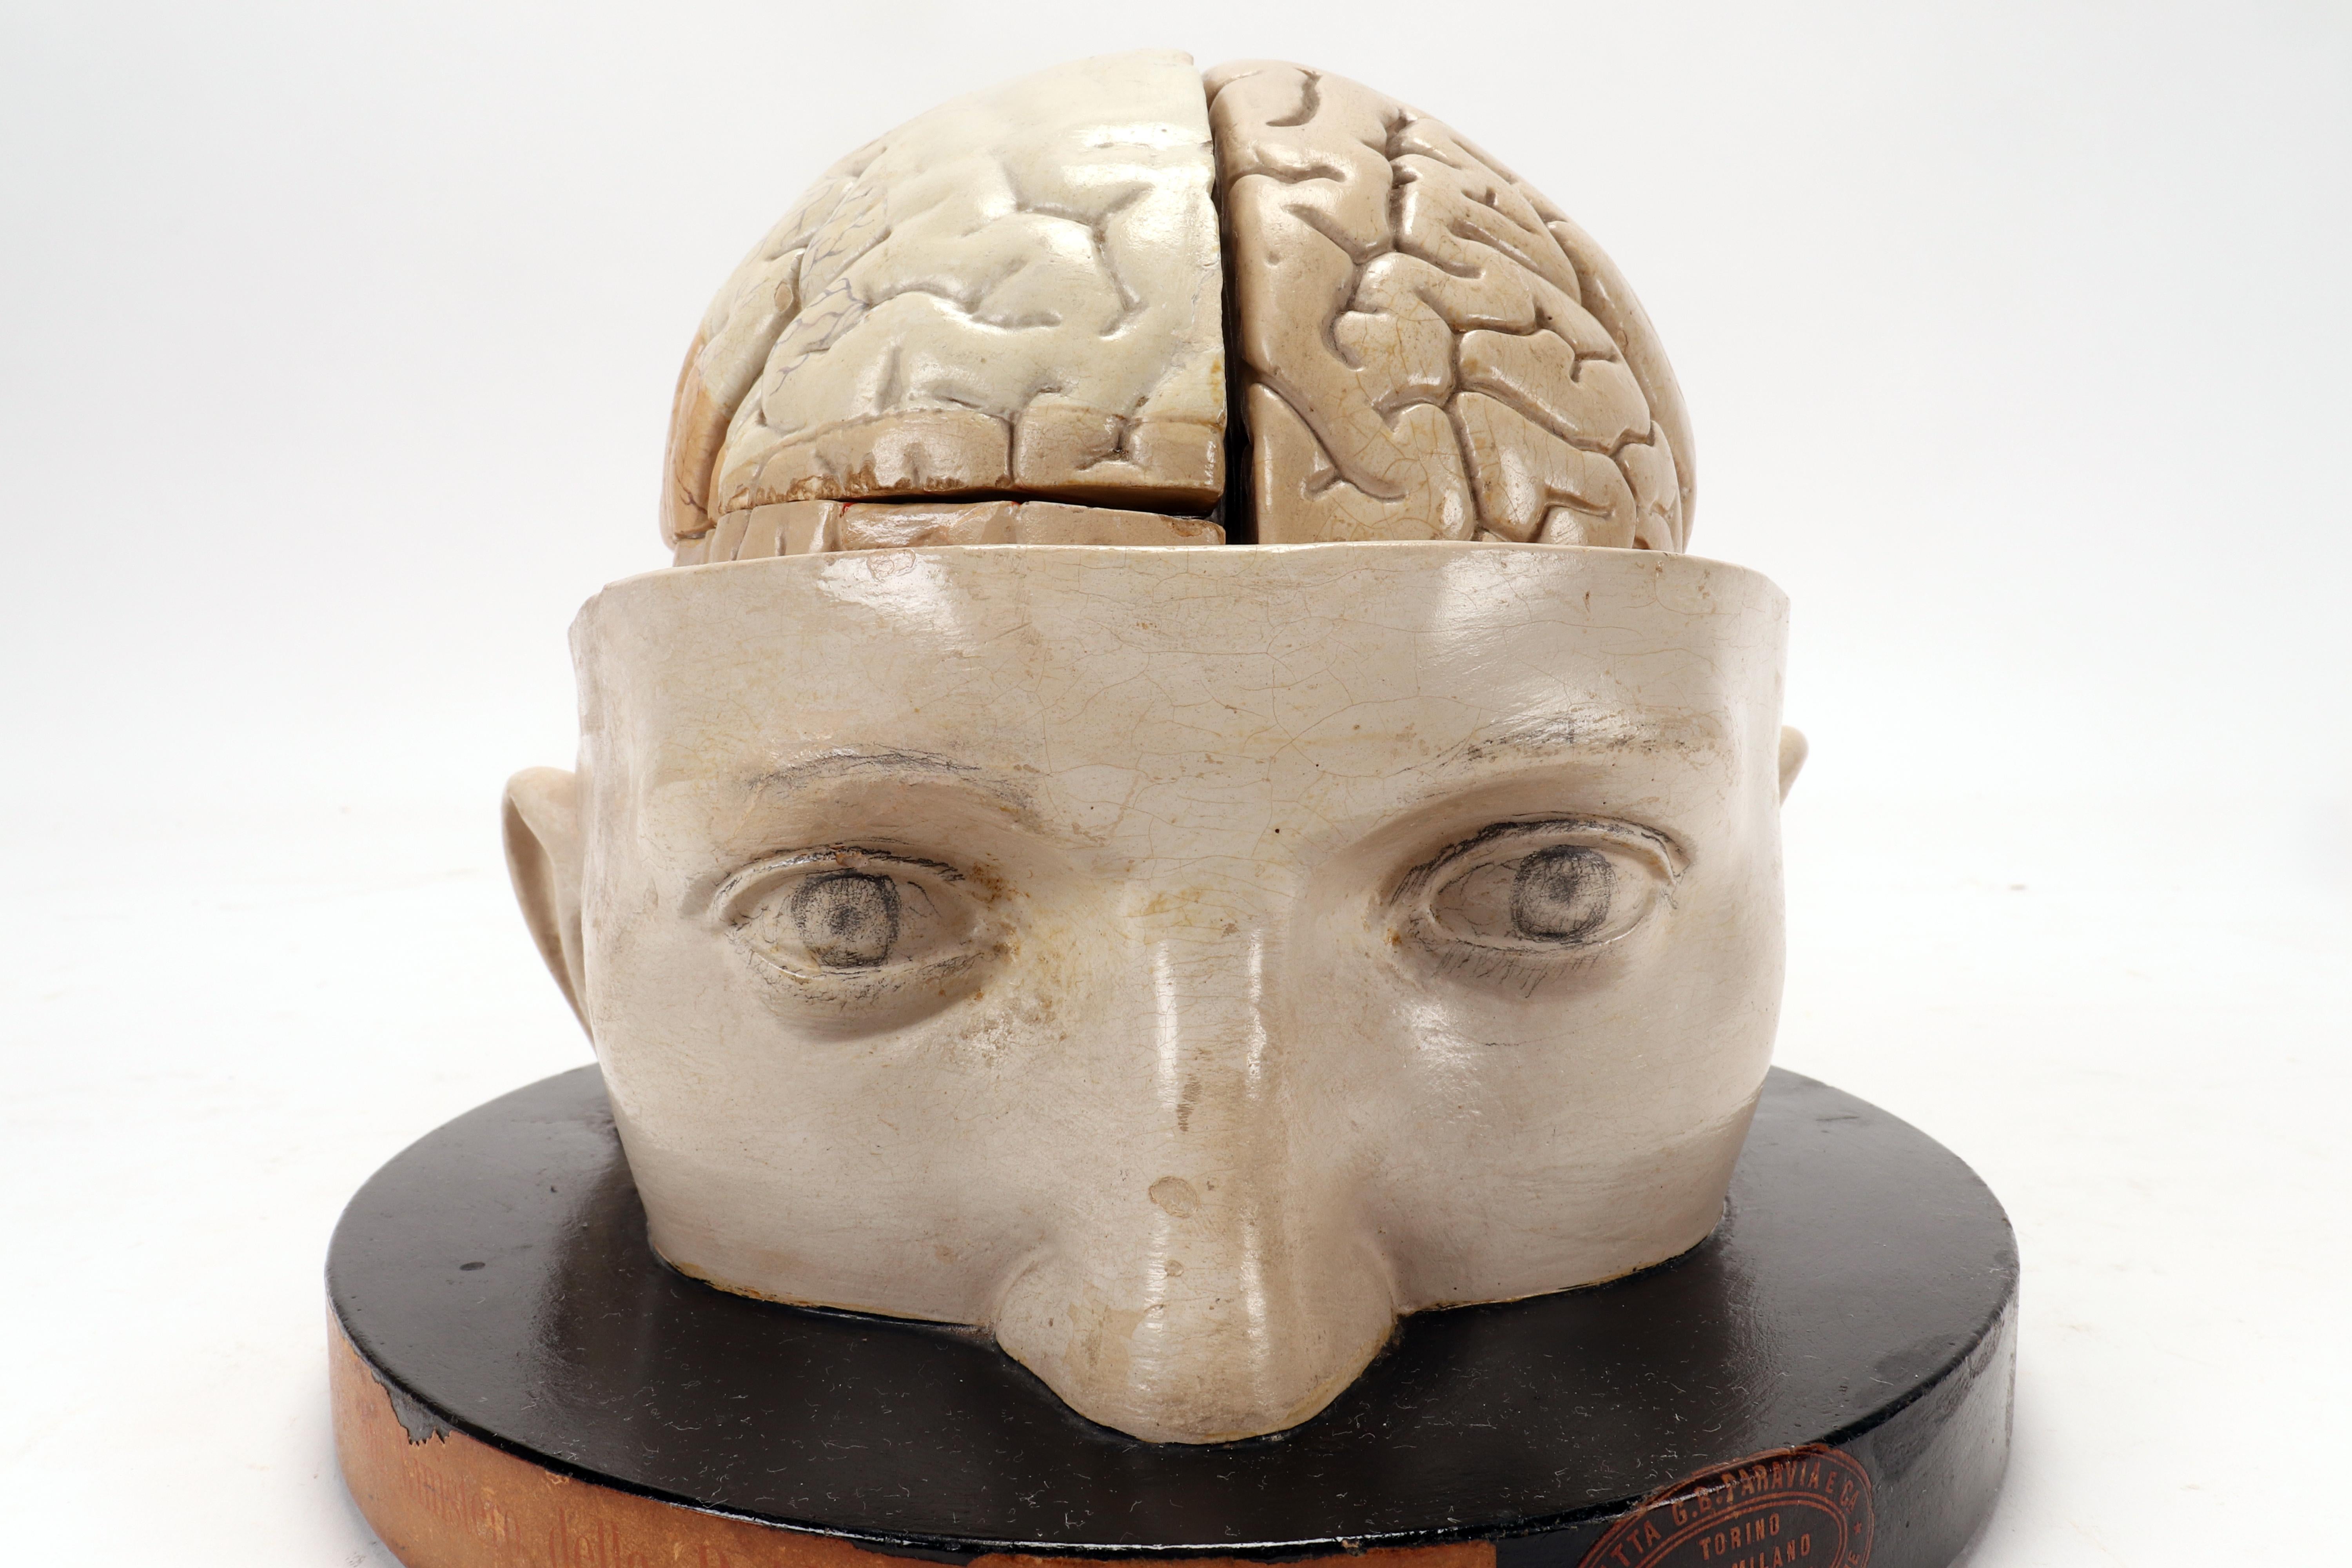 Plaster Anatomical model: a brain inserted into a sectioned skullcap, Italy 1920.